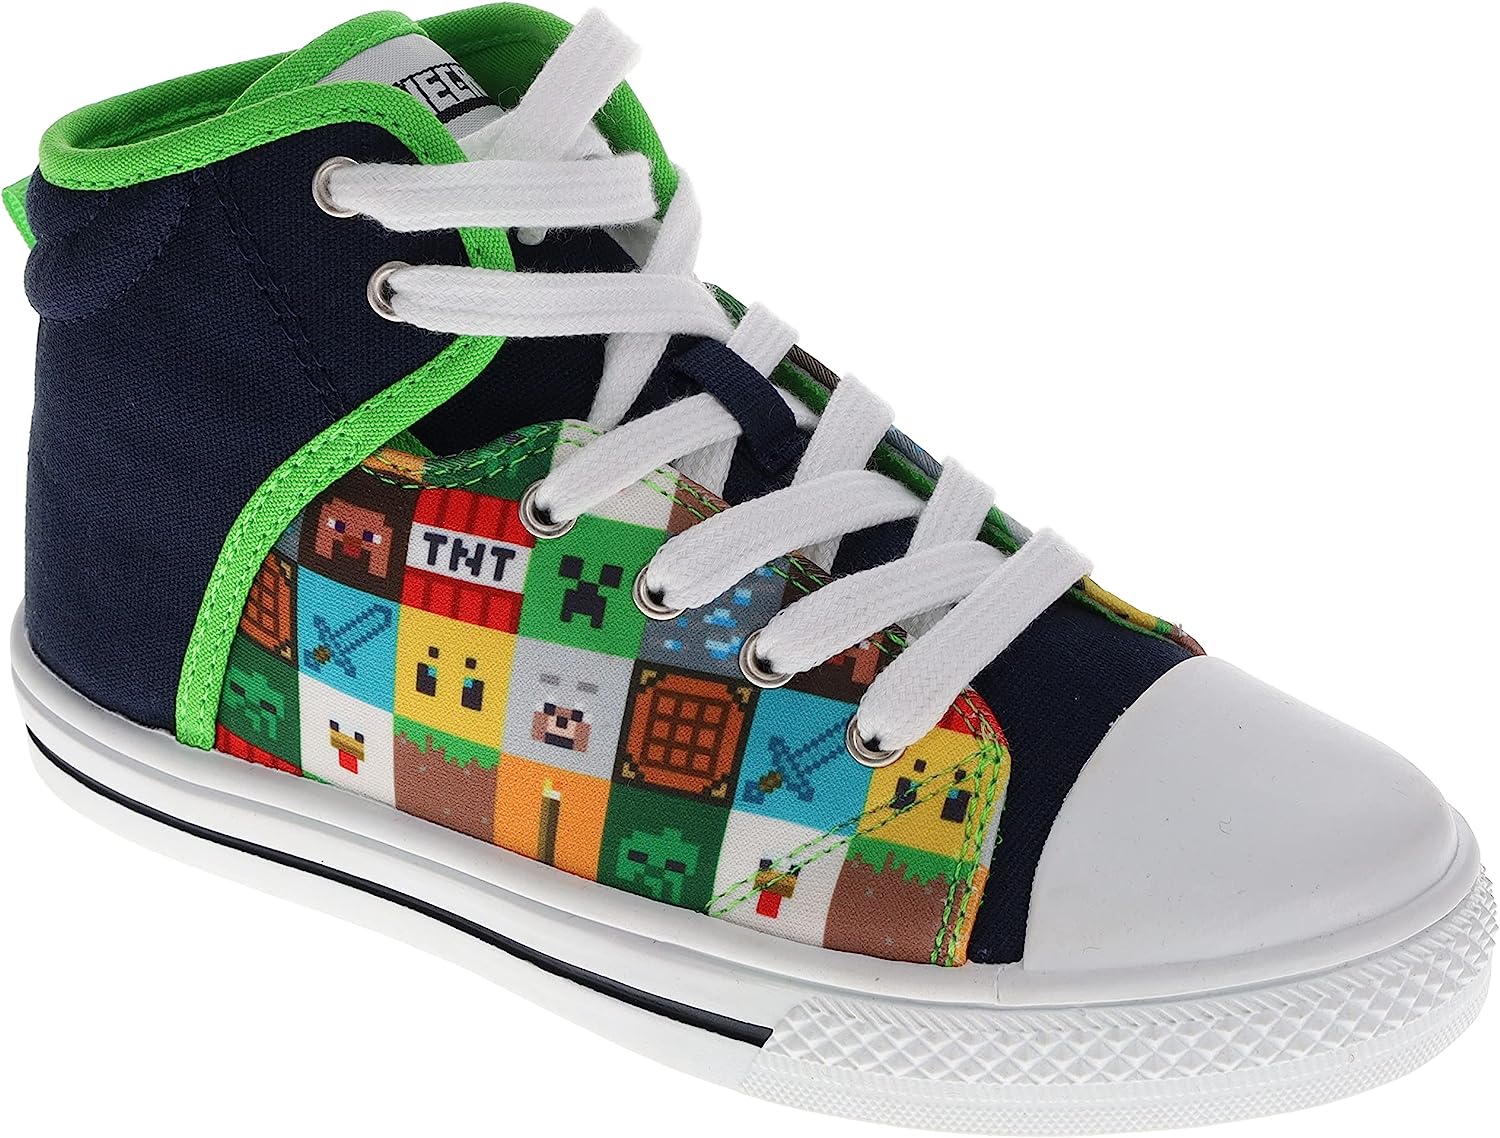 Minecraft Shoes for Boys, High-Top Sneakers for Little [...]